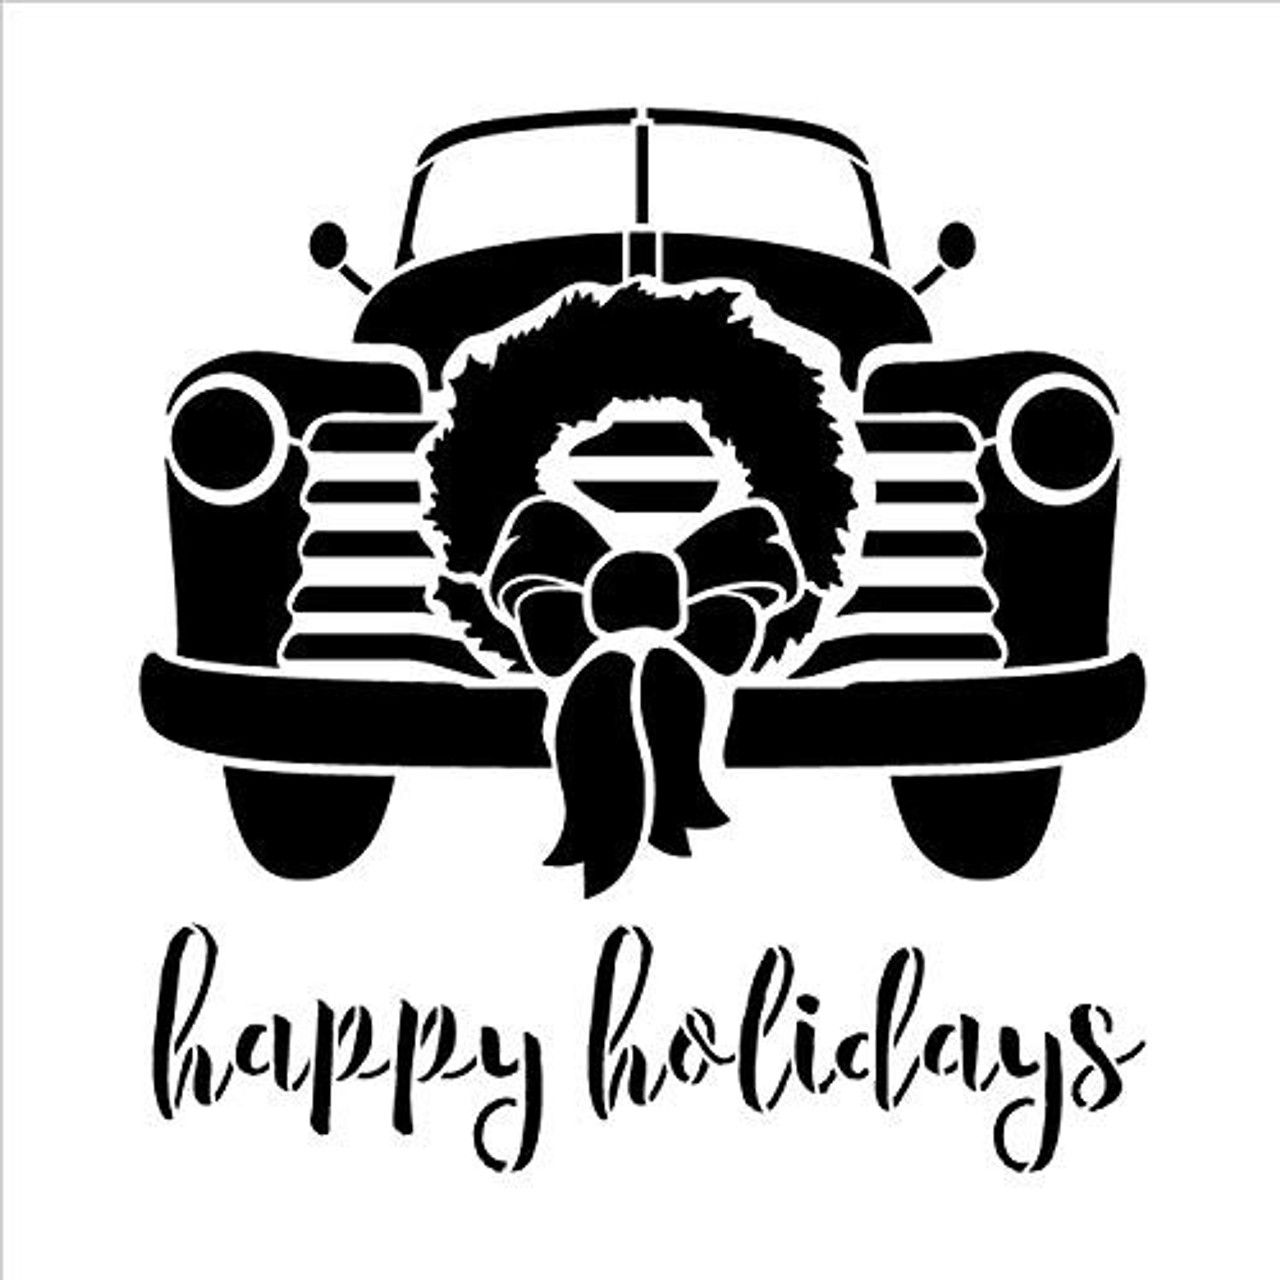 Happy Holidays - Truck with Wreath - by StudioR12 | Reusable Mylar Template | Use to Paint Wood Signs - Walls - Pallets - Pillows - DIY Home Christmas Decor - Select Size